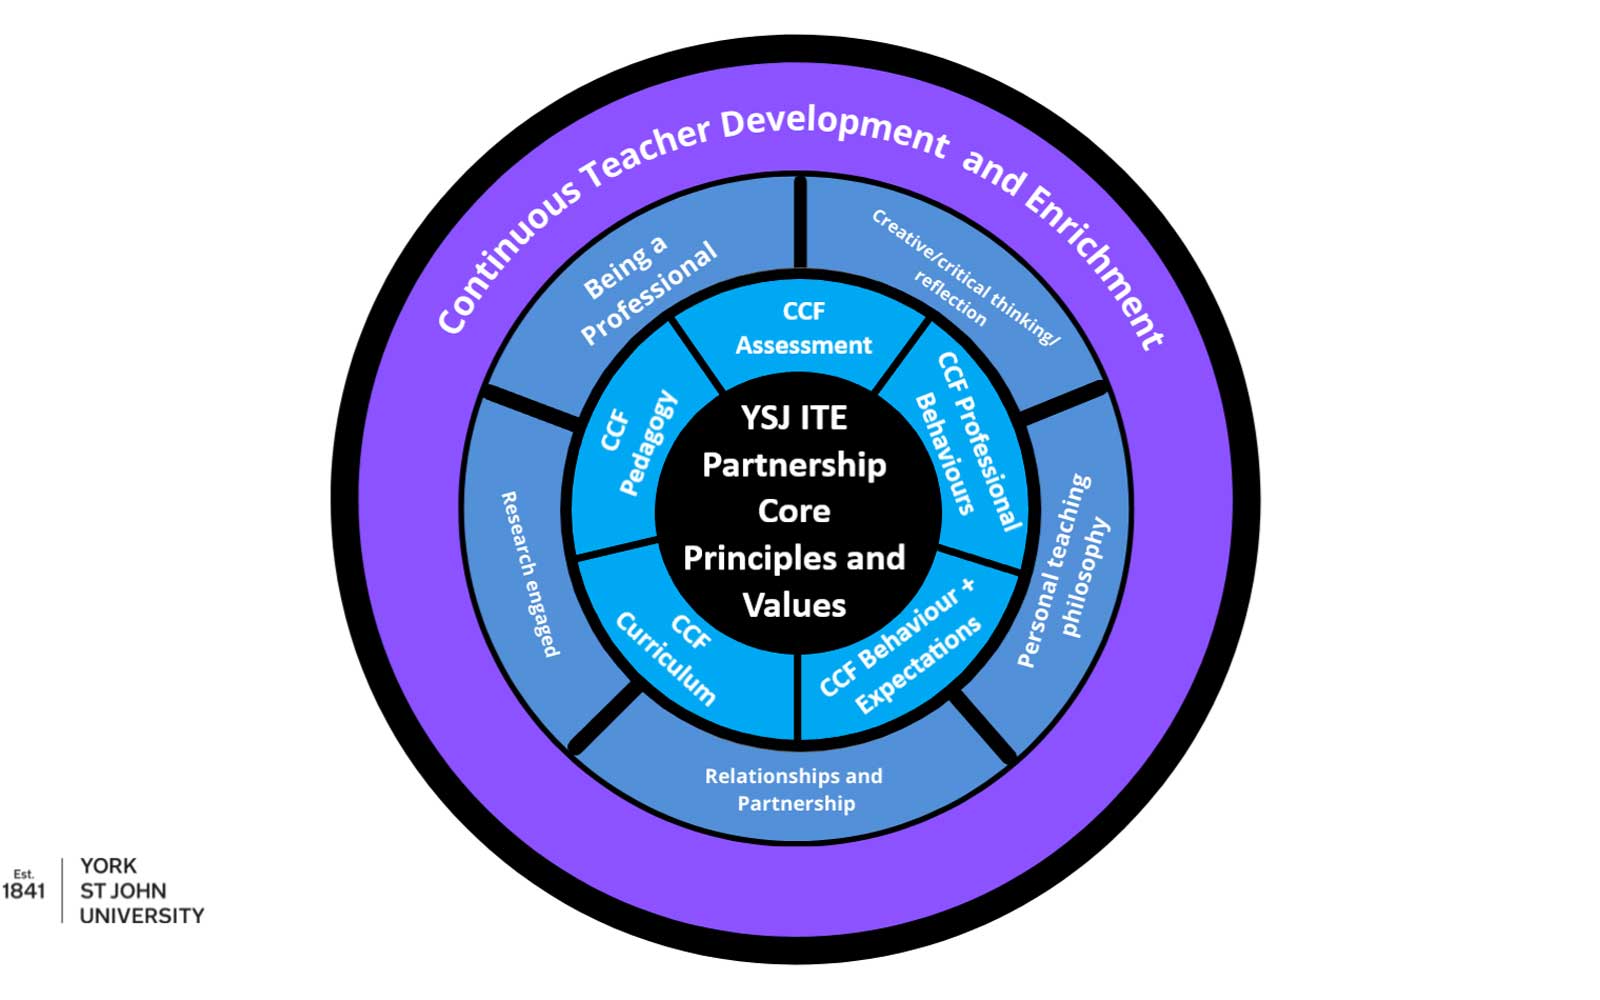 Circular ring diagram to show how York St John's values align with the 8 Teaching Standards. It also shows where the values overlap across multiple standards.